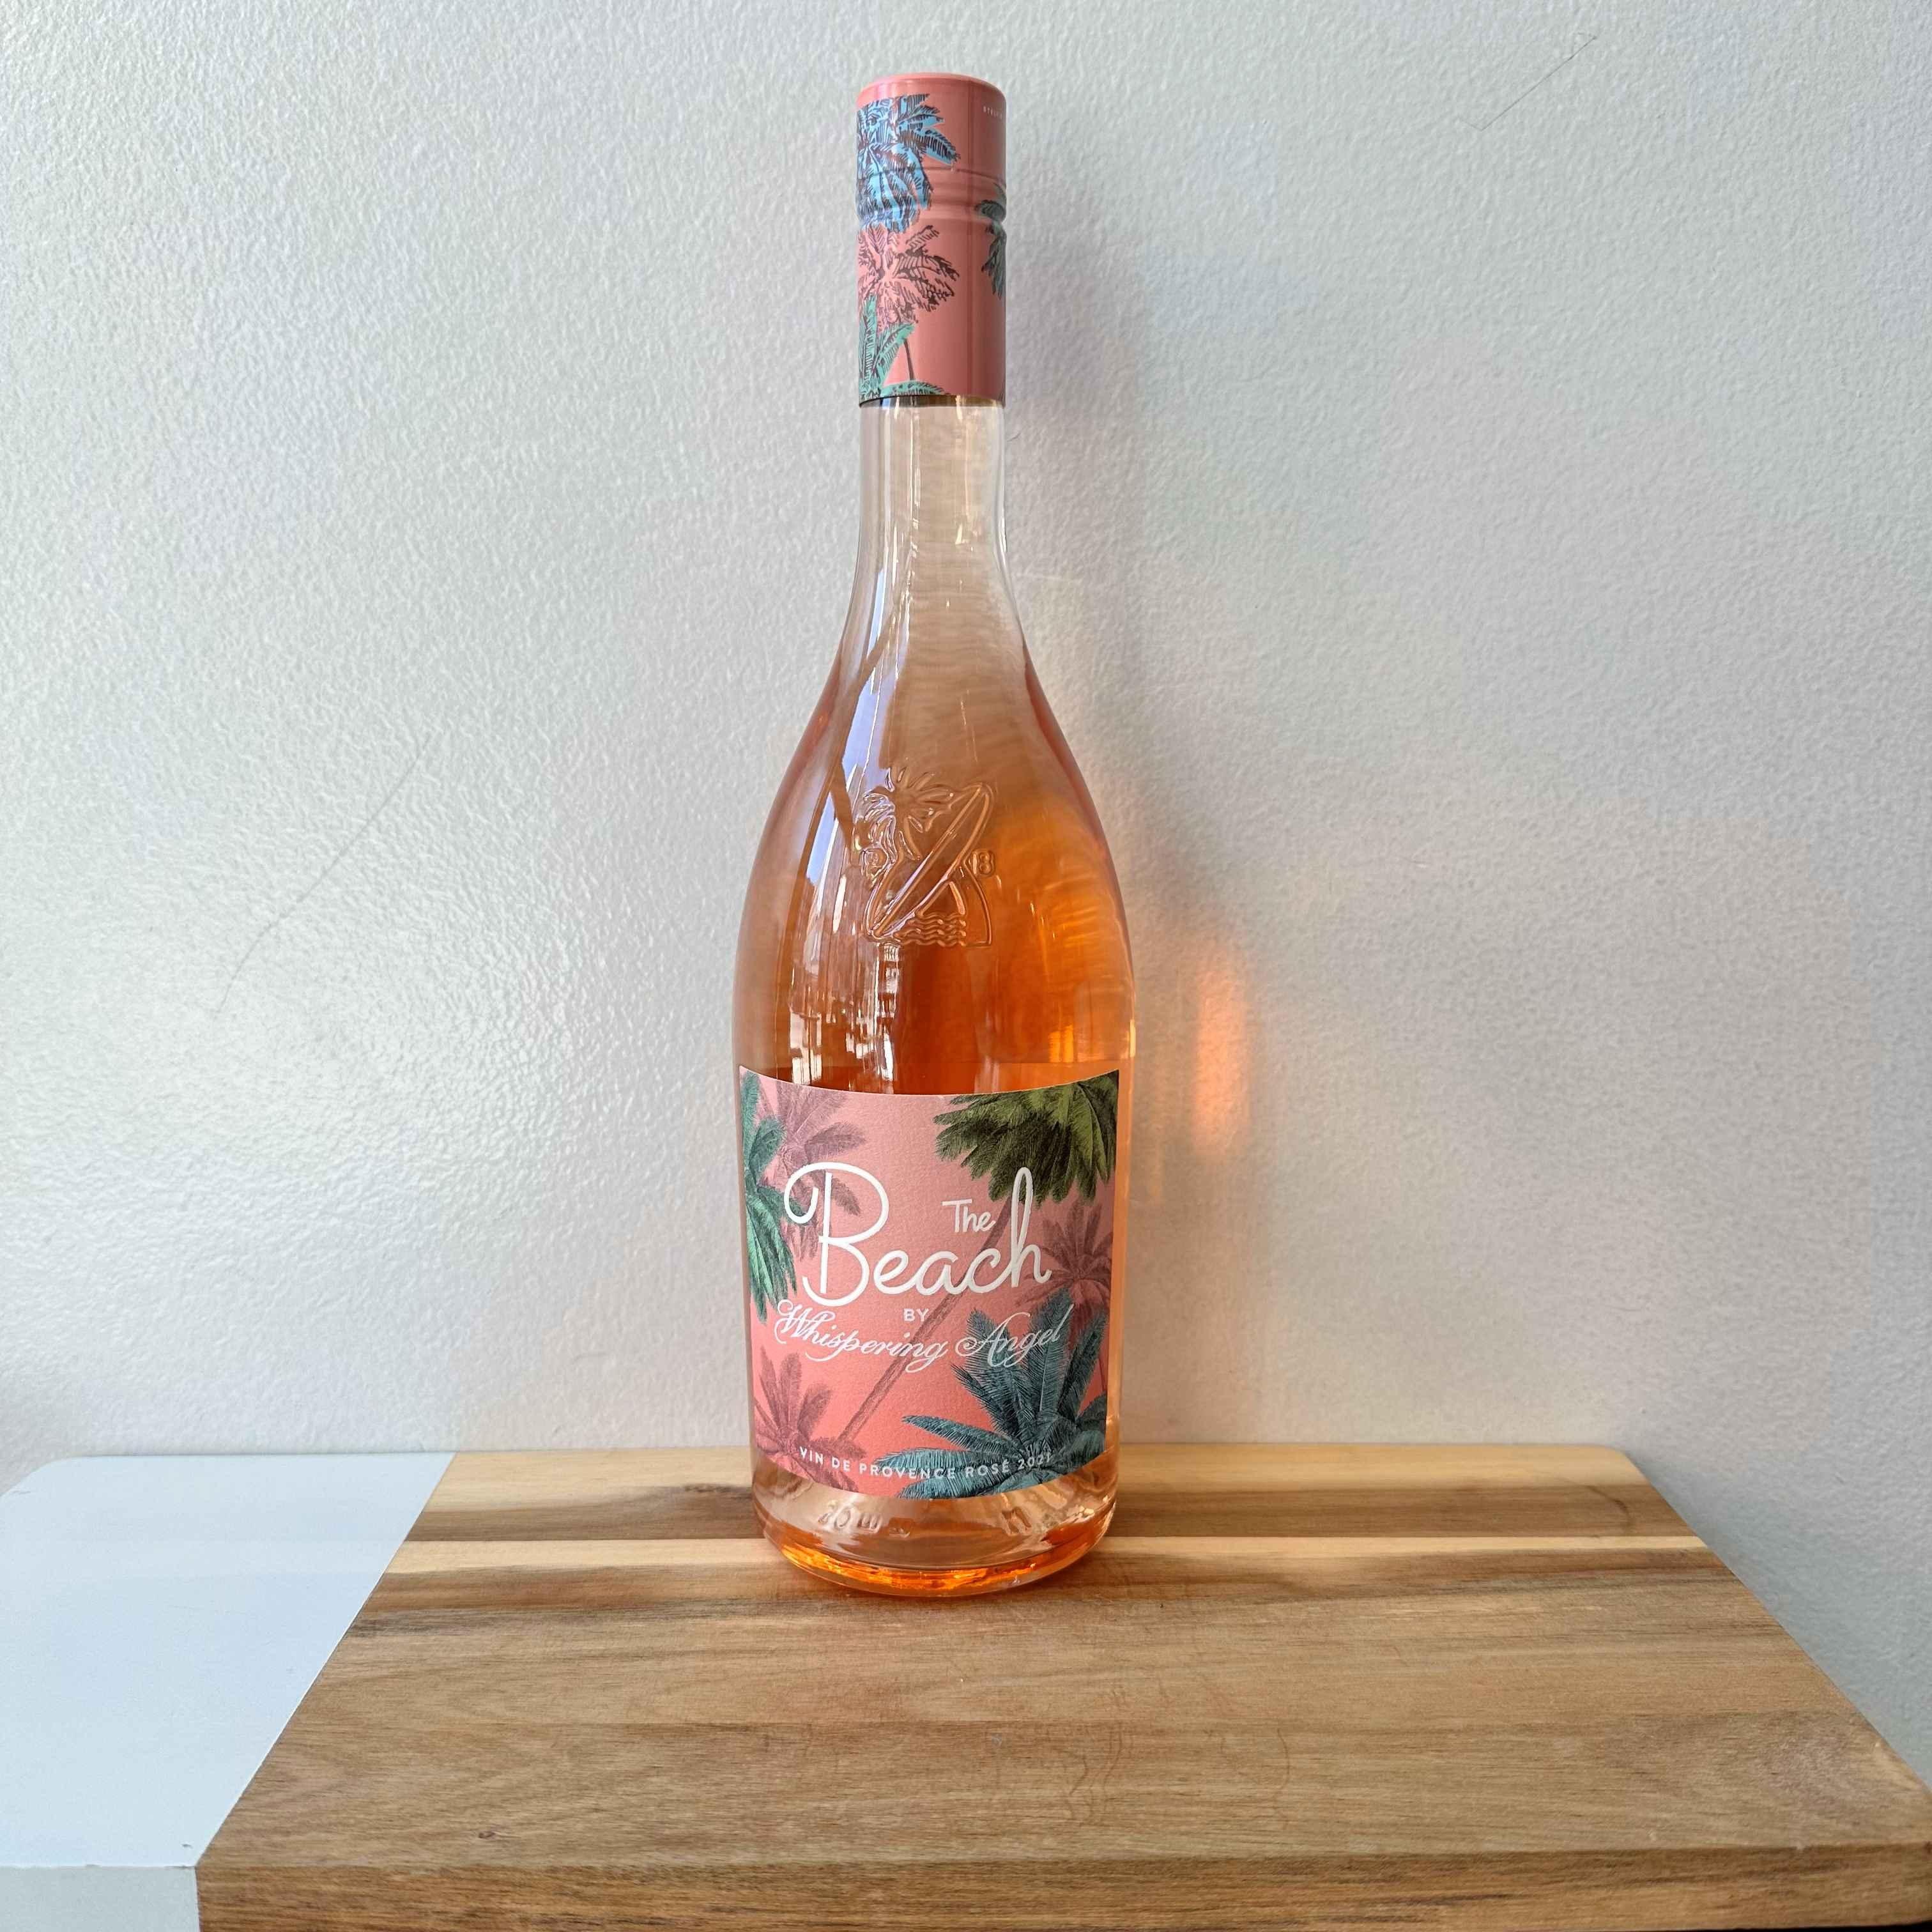 Chateau d'Esclans "The Beach" by Whispering Angel Rosé 2021 France